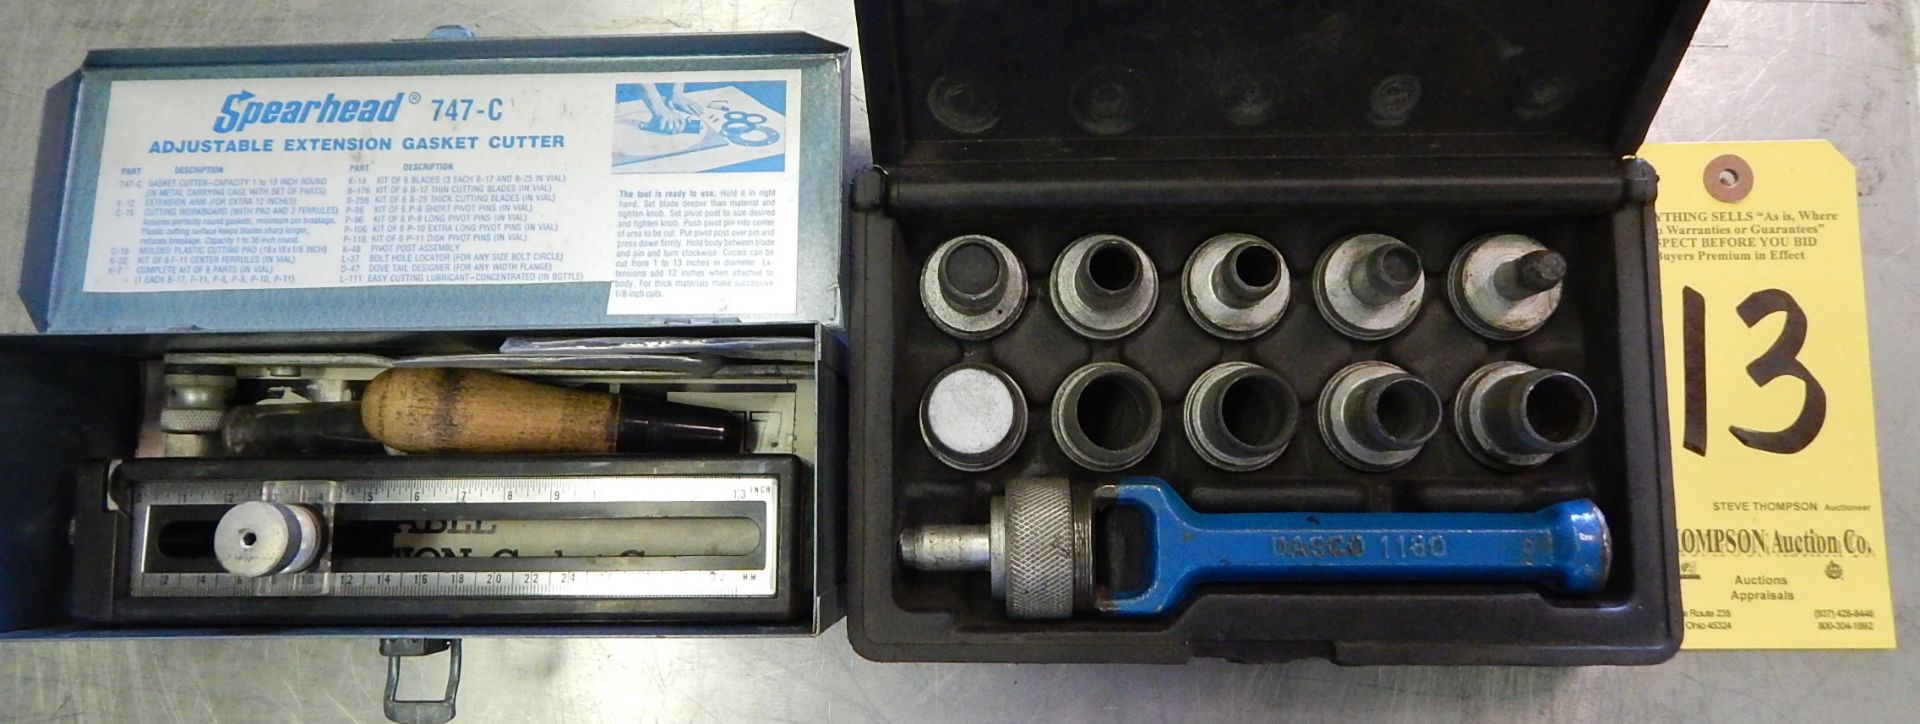 Spearhead Gasket Cutter and Dasco Gasket Punch Set